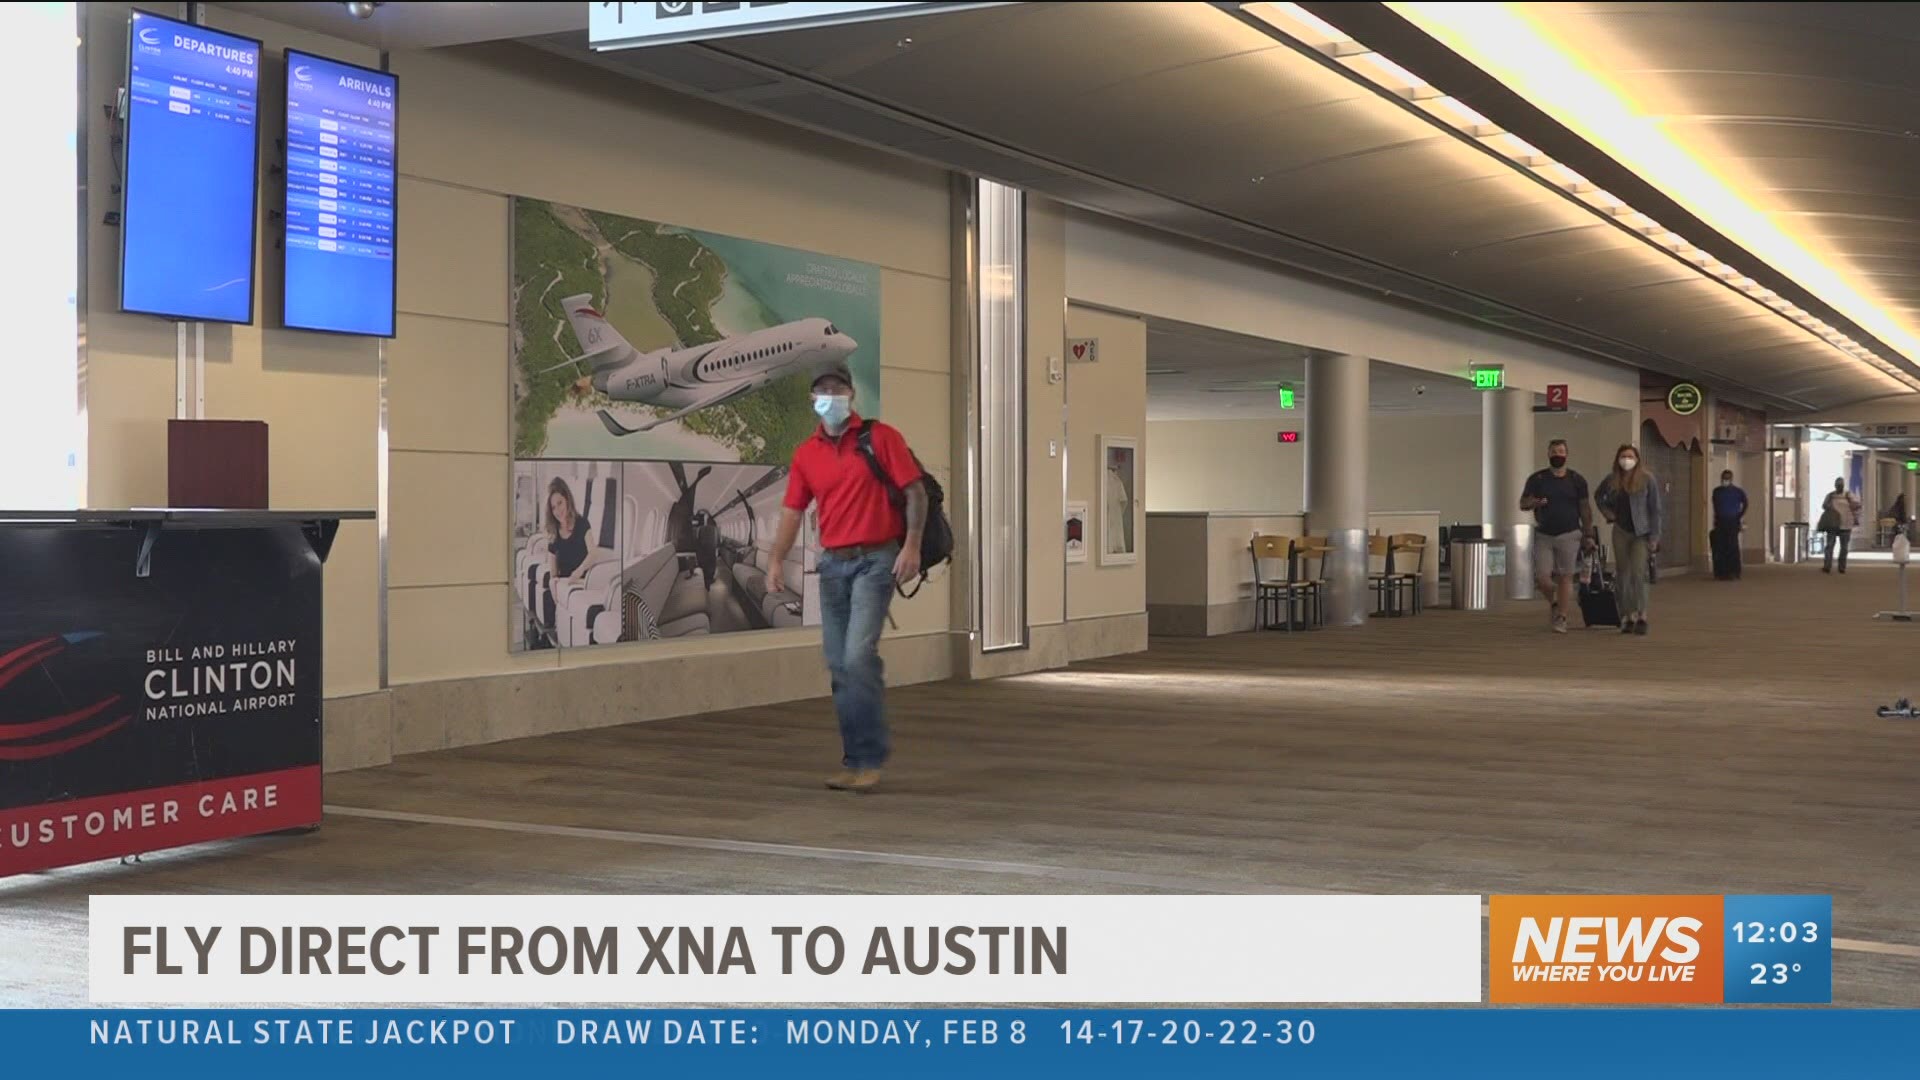 Beginning this summer, Allegiant Air will offer a direct flight from XNA to Austin with one-way fares as low as $49.